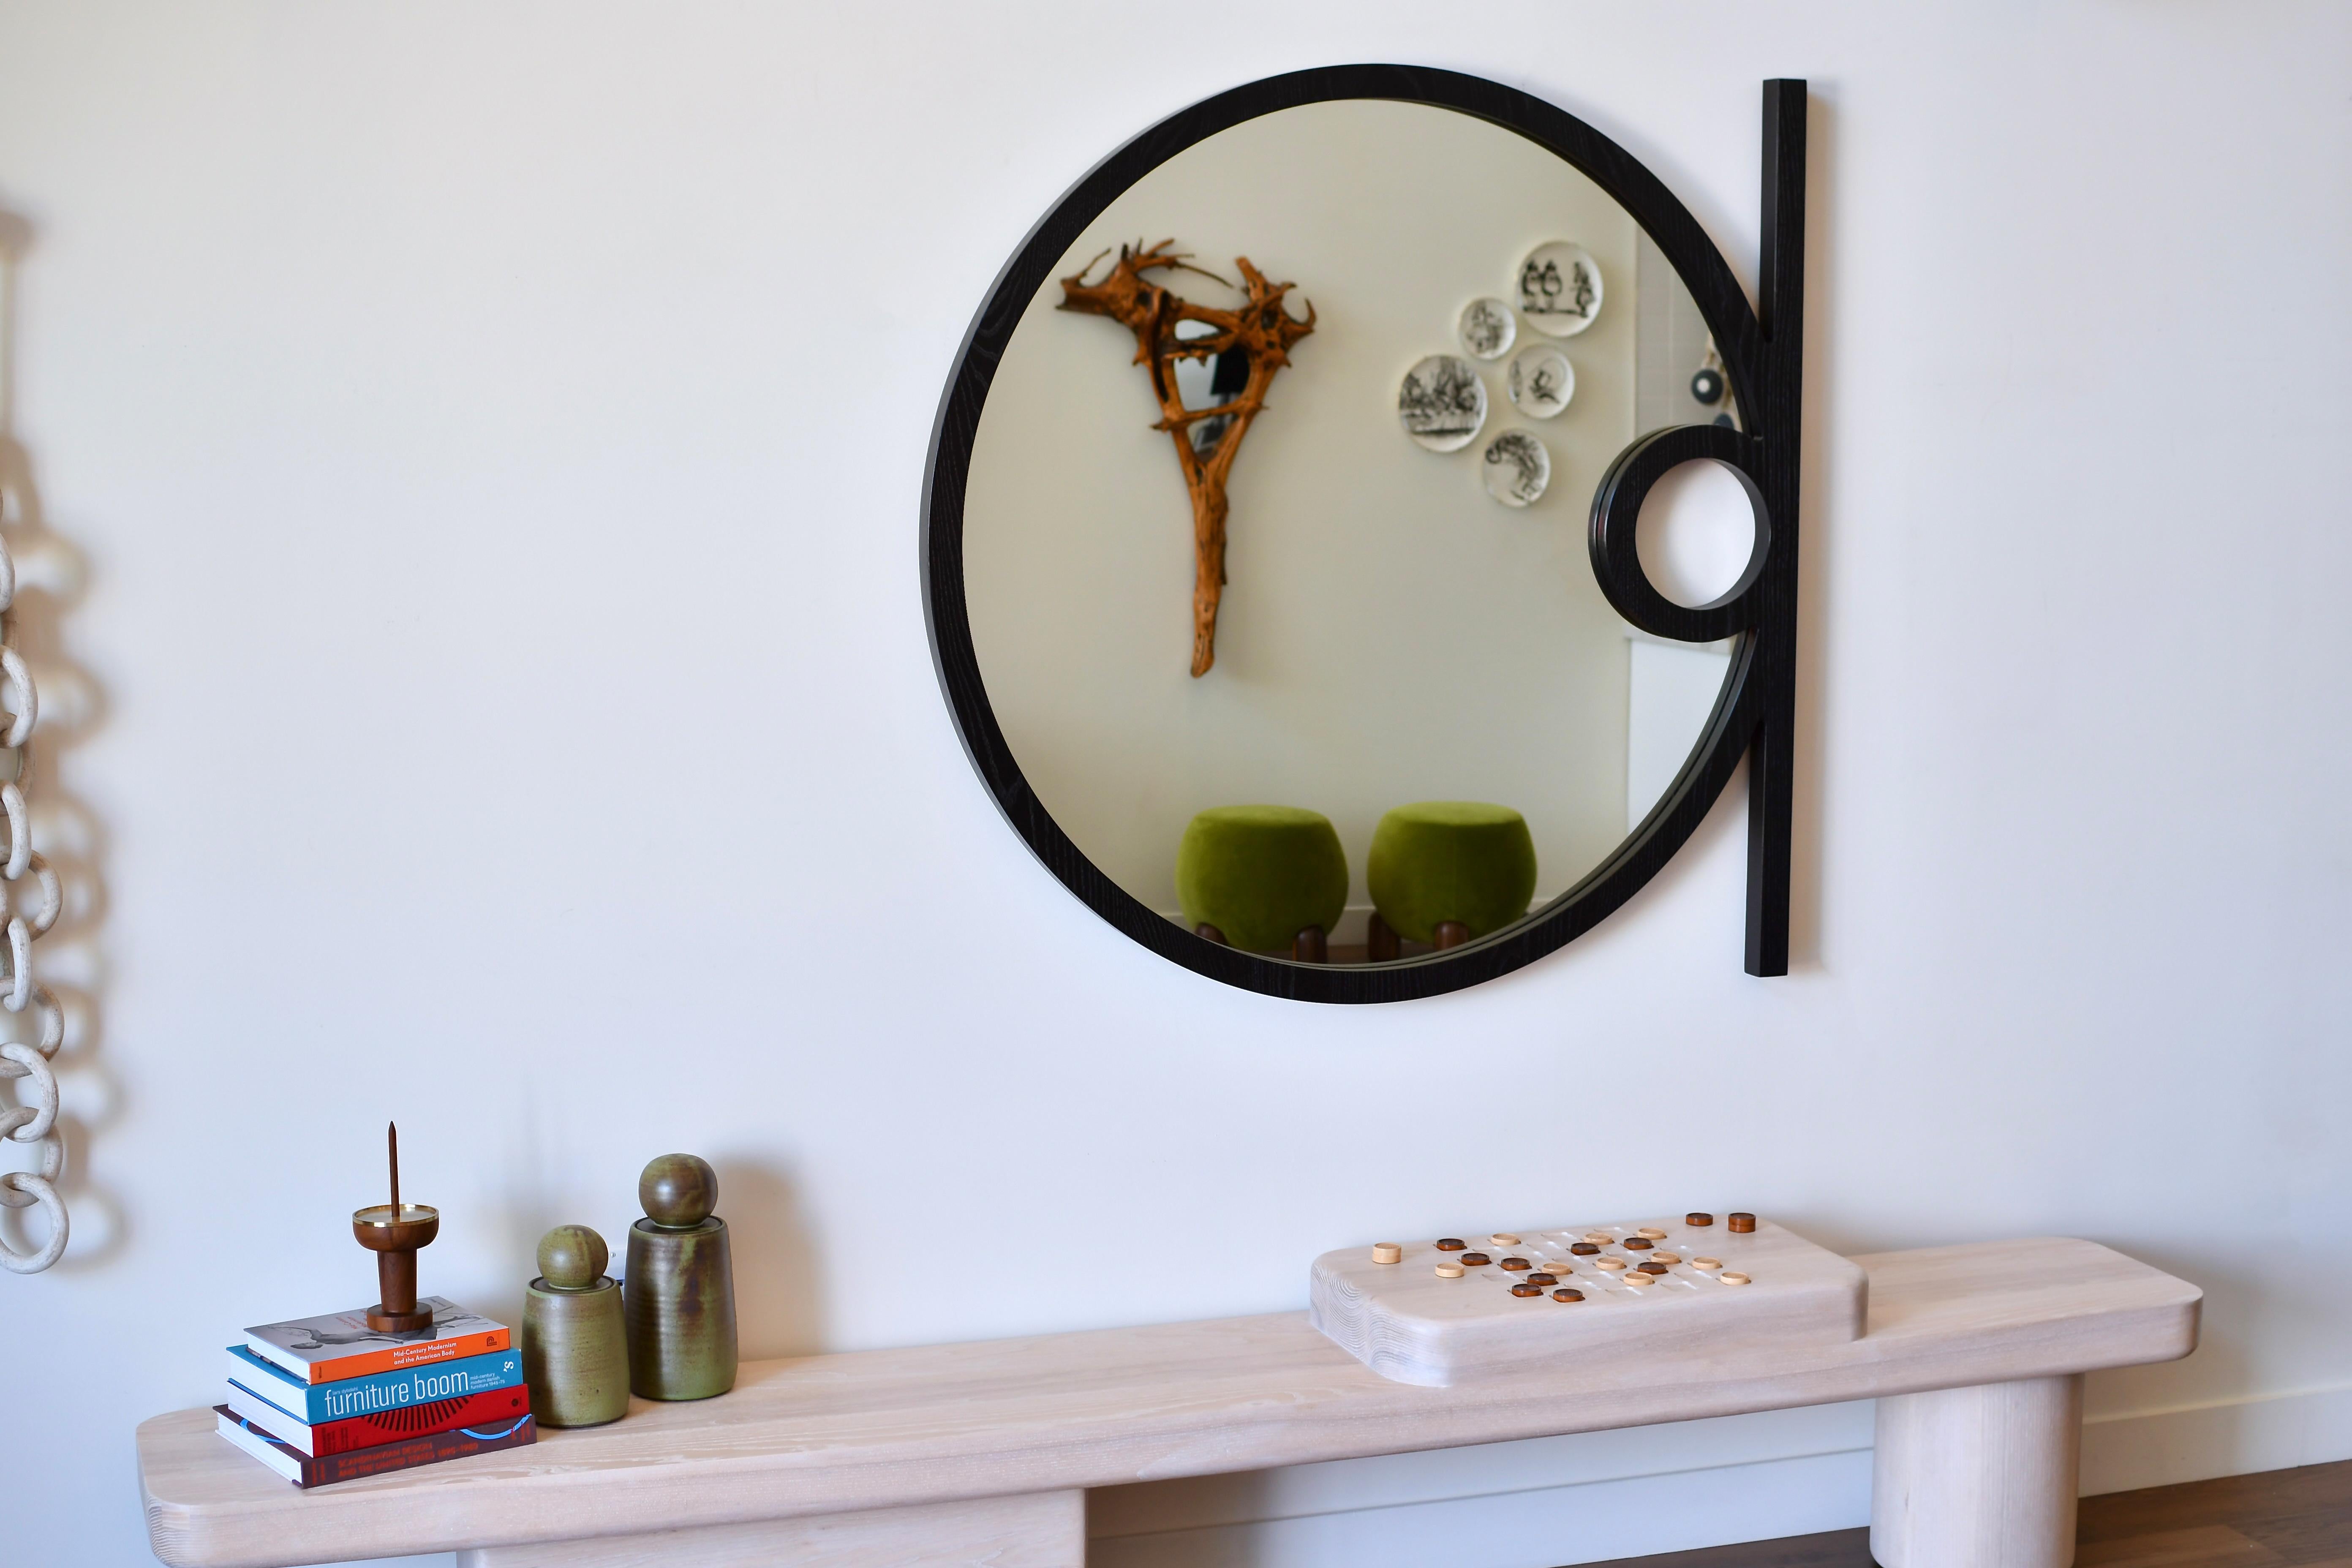 The Silas Wall Mirror and its elegant round shape plays with geometry, clean lines and form creating a strong visual statement in any room. 

Standard sizes available in 36